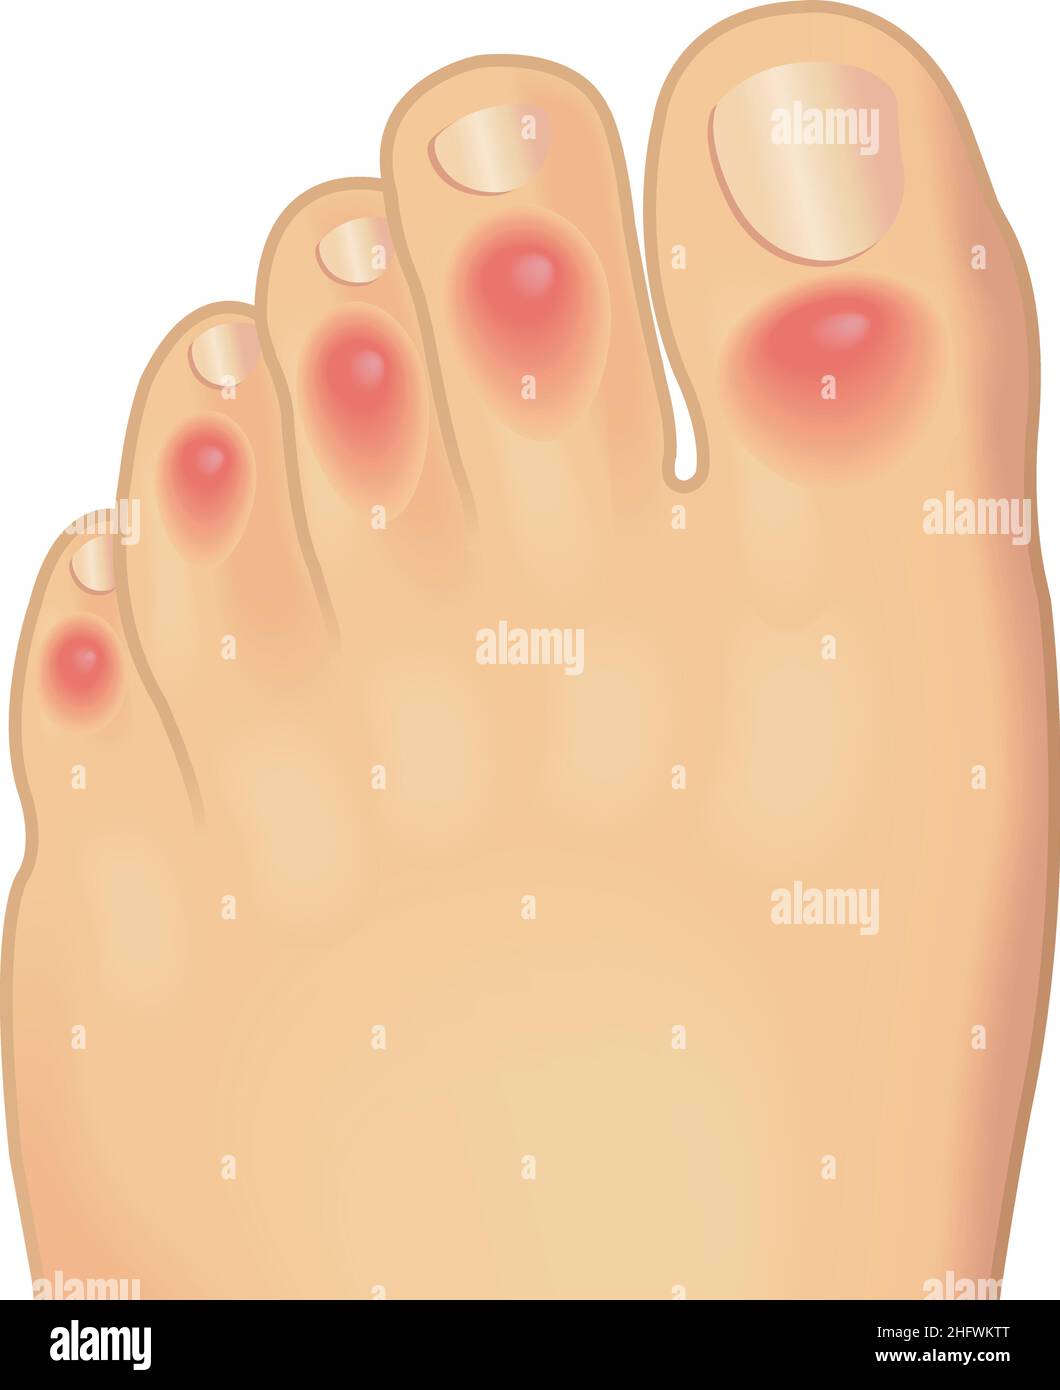 Medical illustrations of the toes afflicted from chilblains. Stock Vector